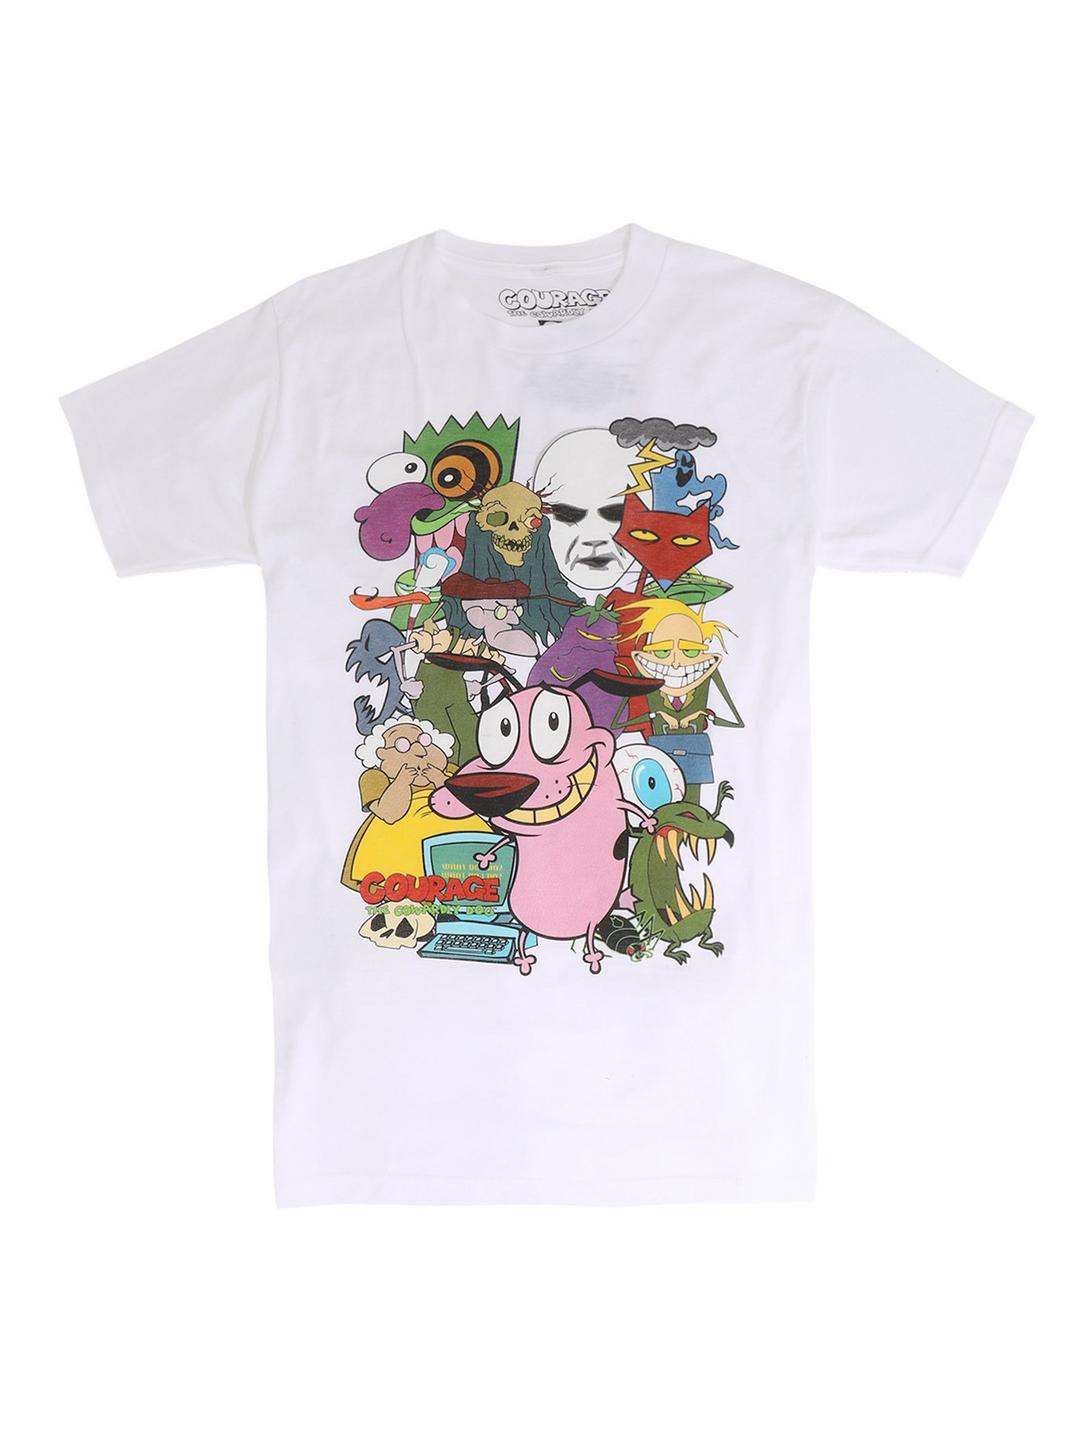 Courage The Cowardly Dog Characters T-Shirt, WHITE, hi-res